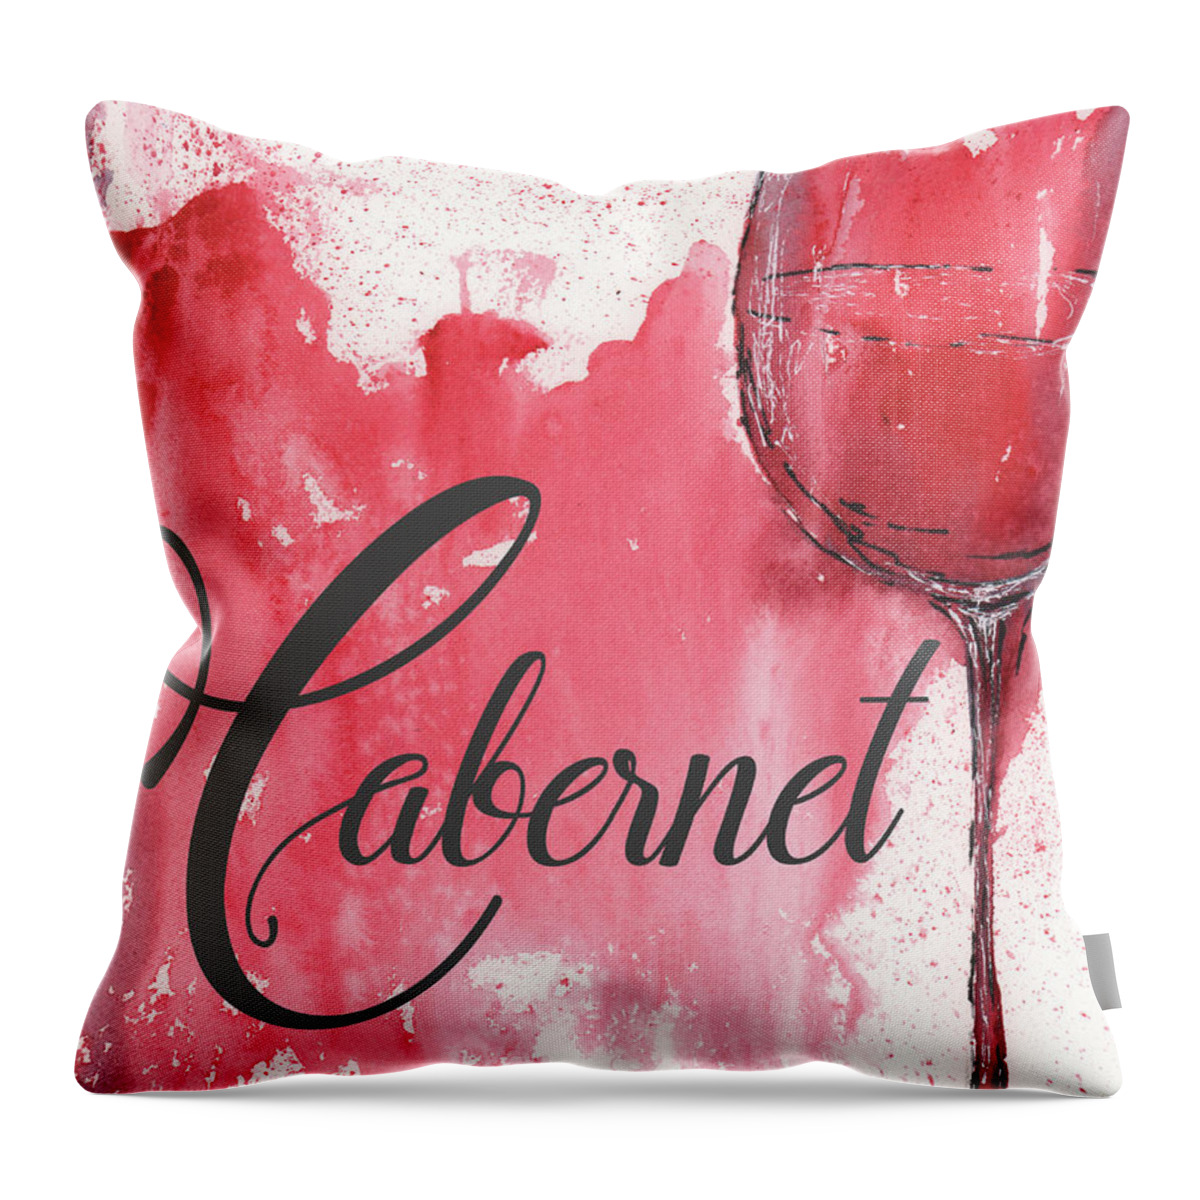 Cabernet Watercolor Throw Pillow featuring the painting Cabernet Wine Watercolor by Debbie Cerone